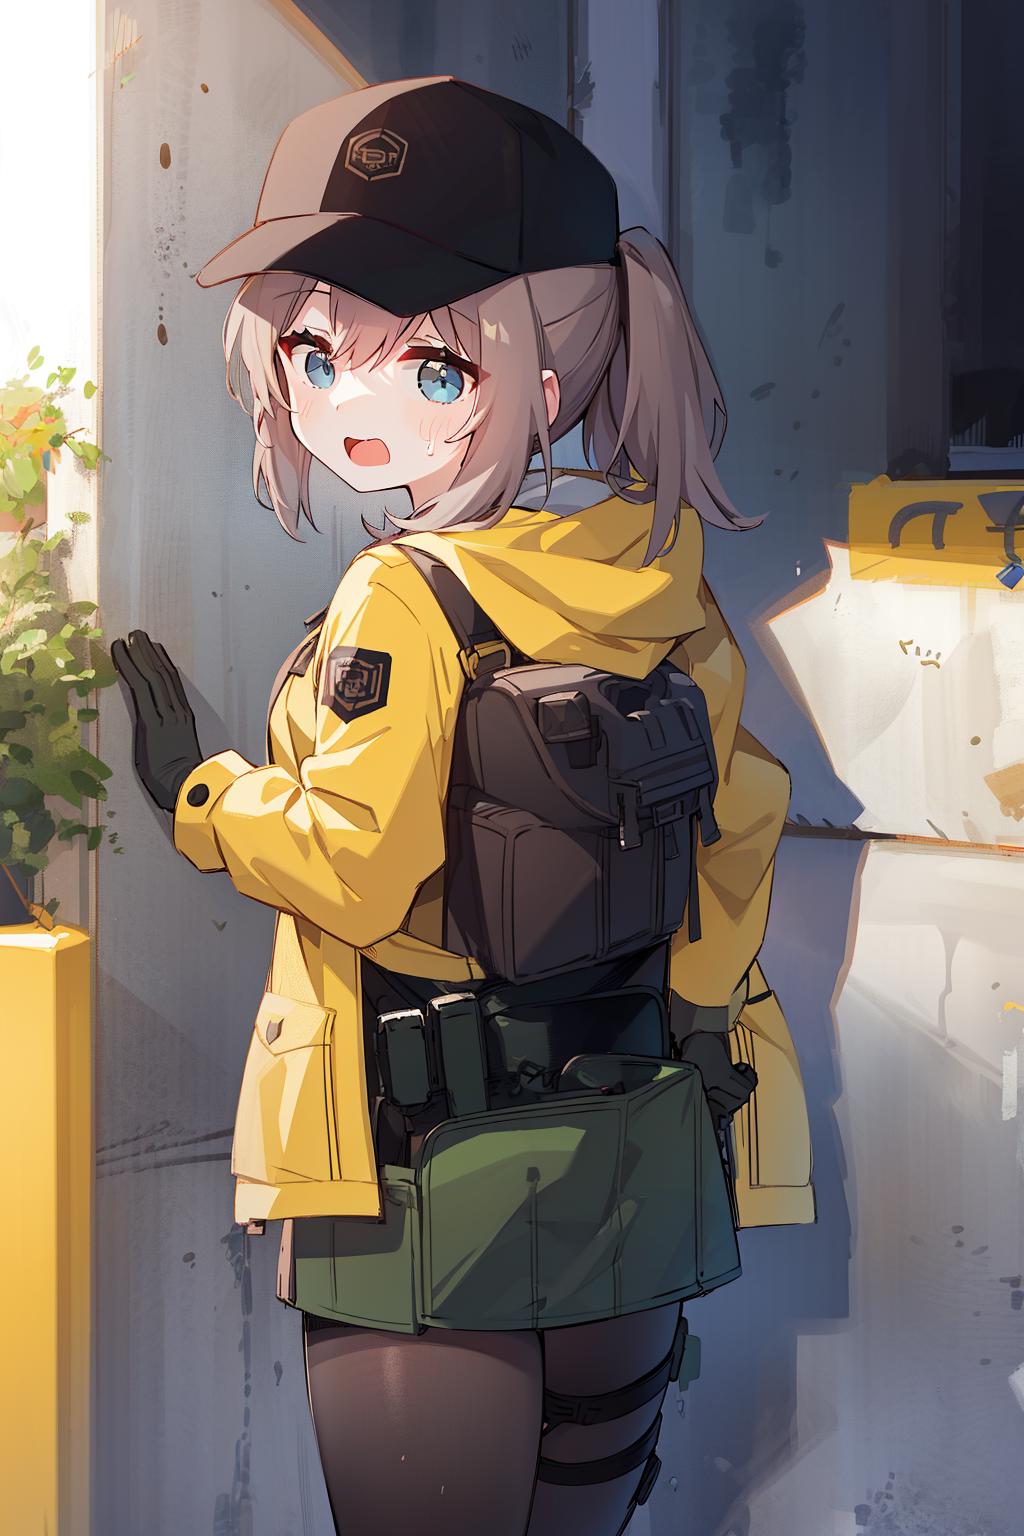 Dima | Girls' Frontline image by SomeAIGuy